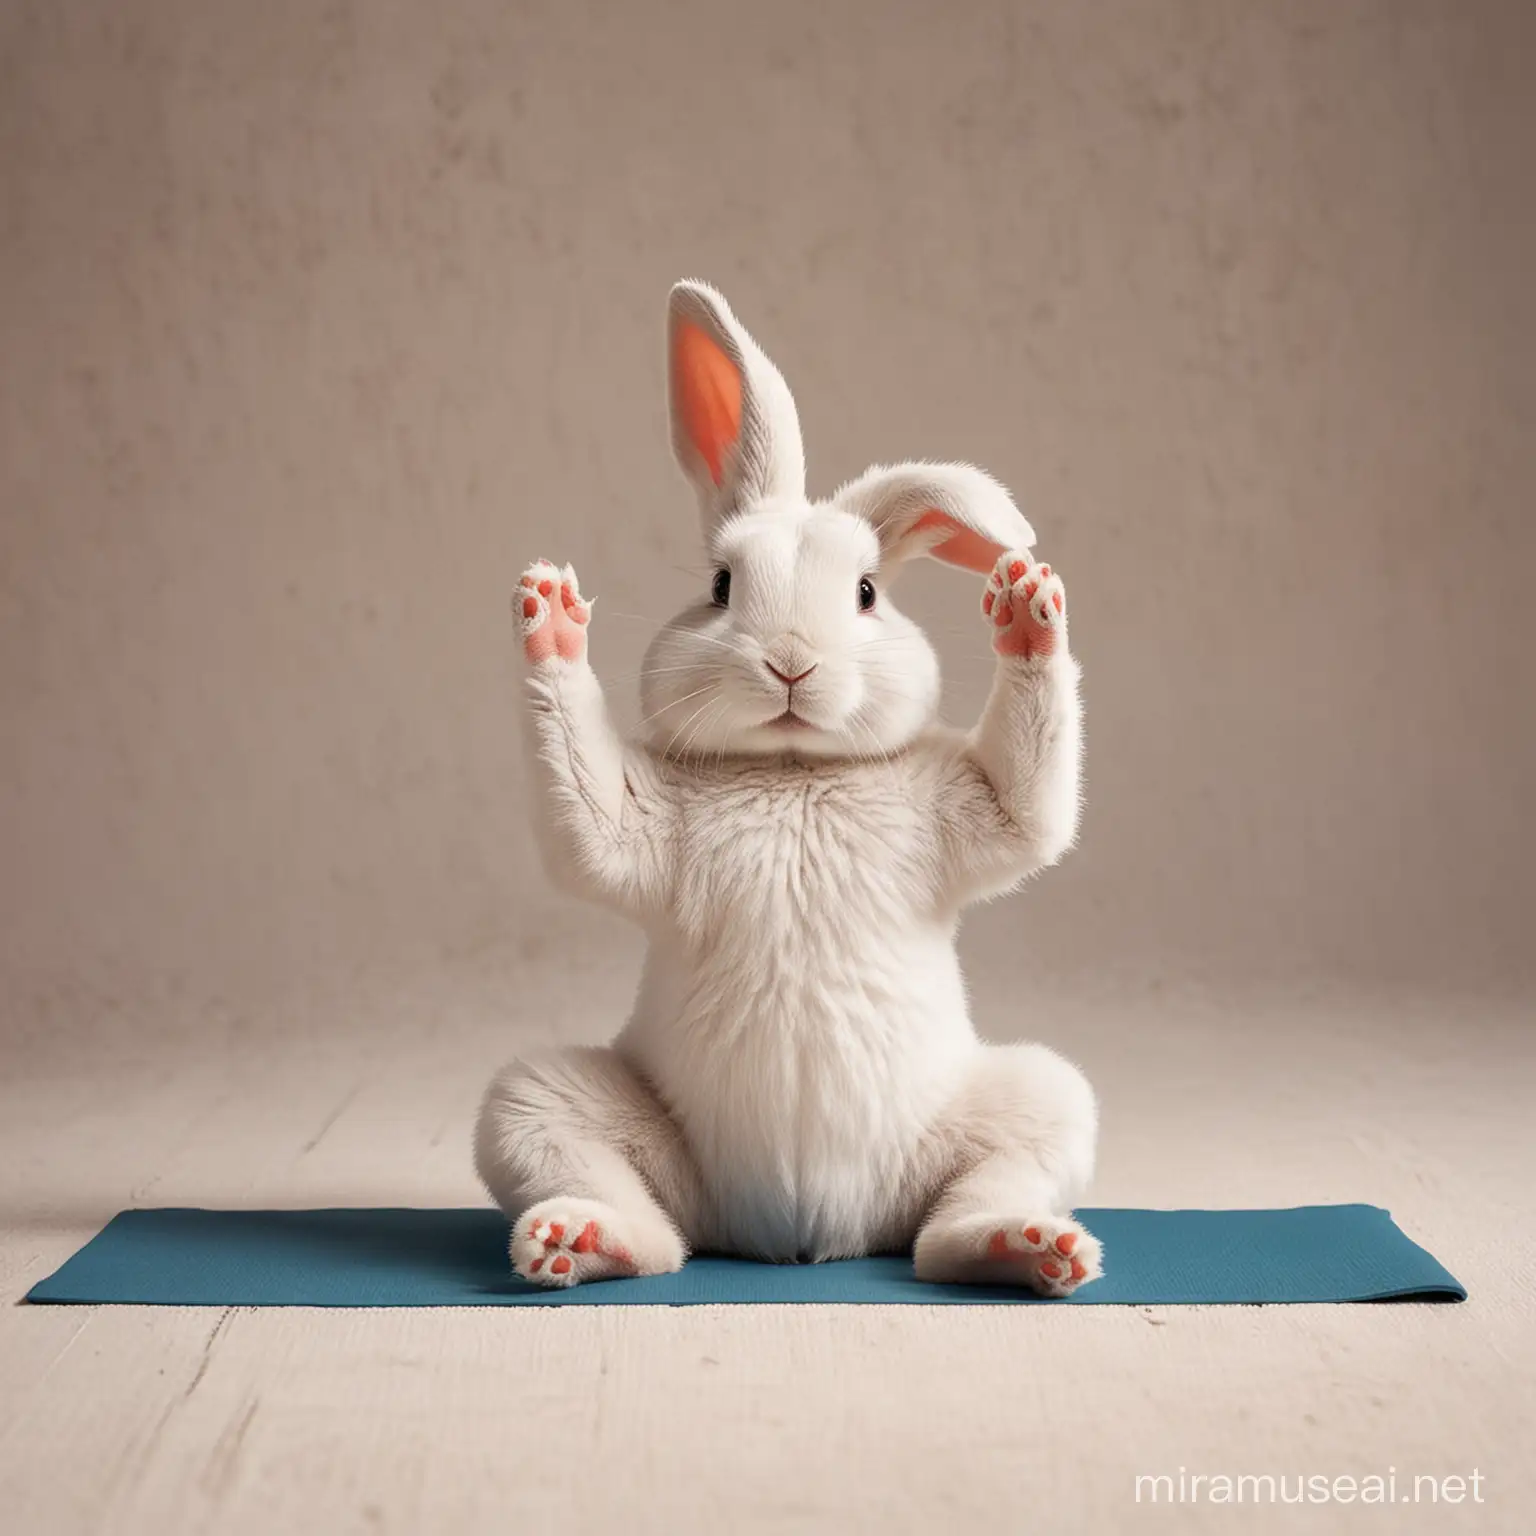 create a image of a bunny practicing yoga